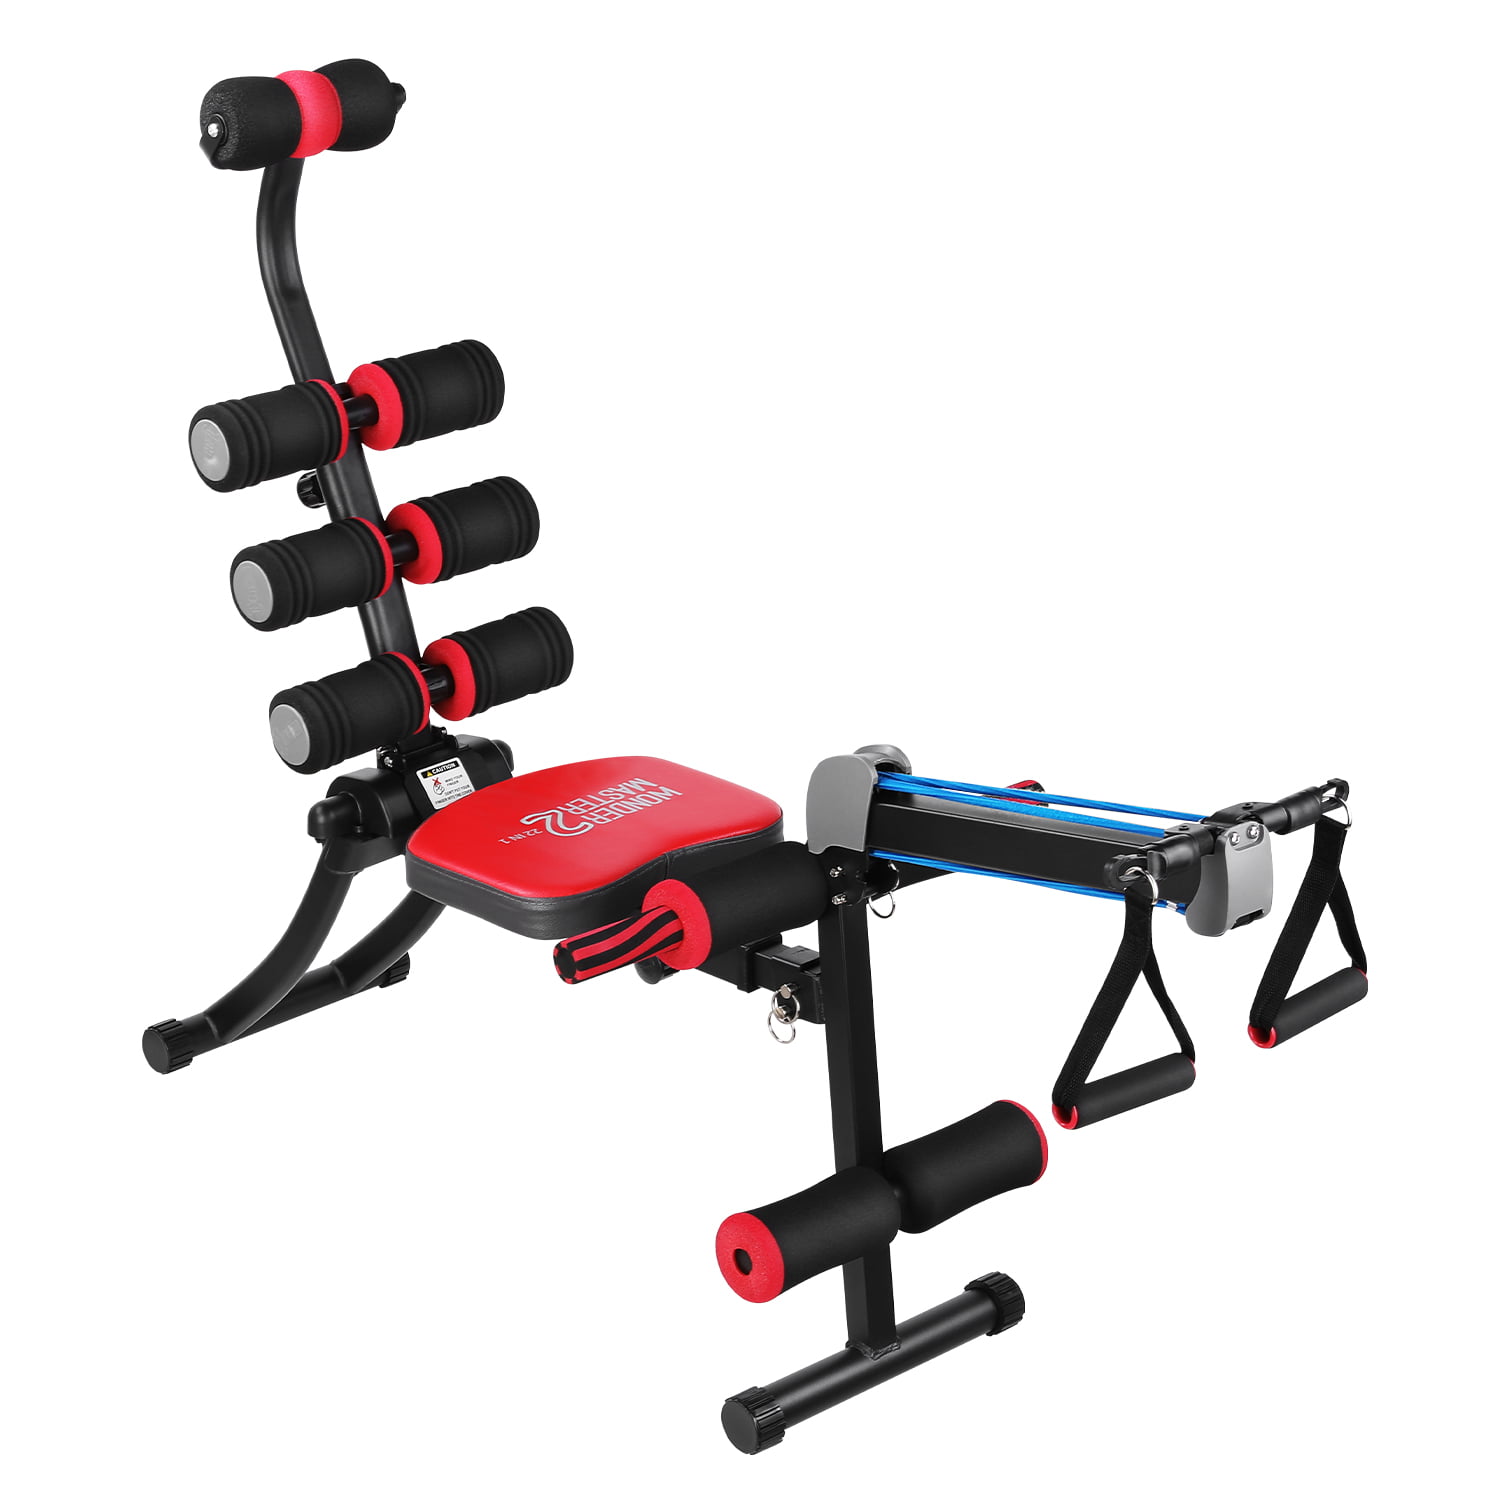 Details about   Ab Abdominal Exercise Machine Cruncher Trainer Body Shaper Fitness Gym Equipment 